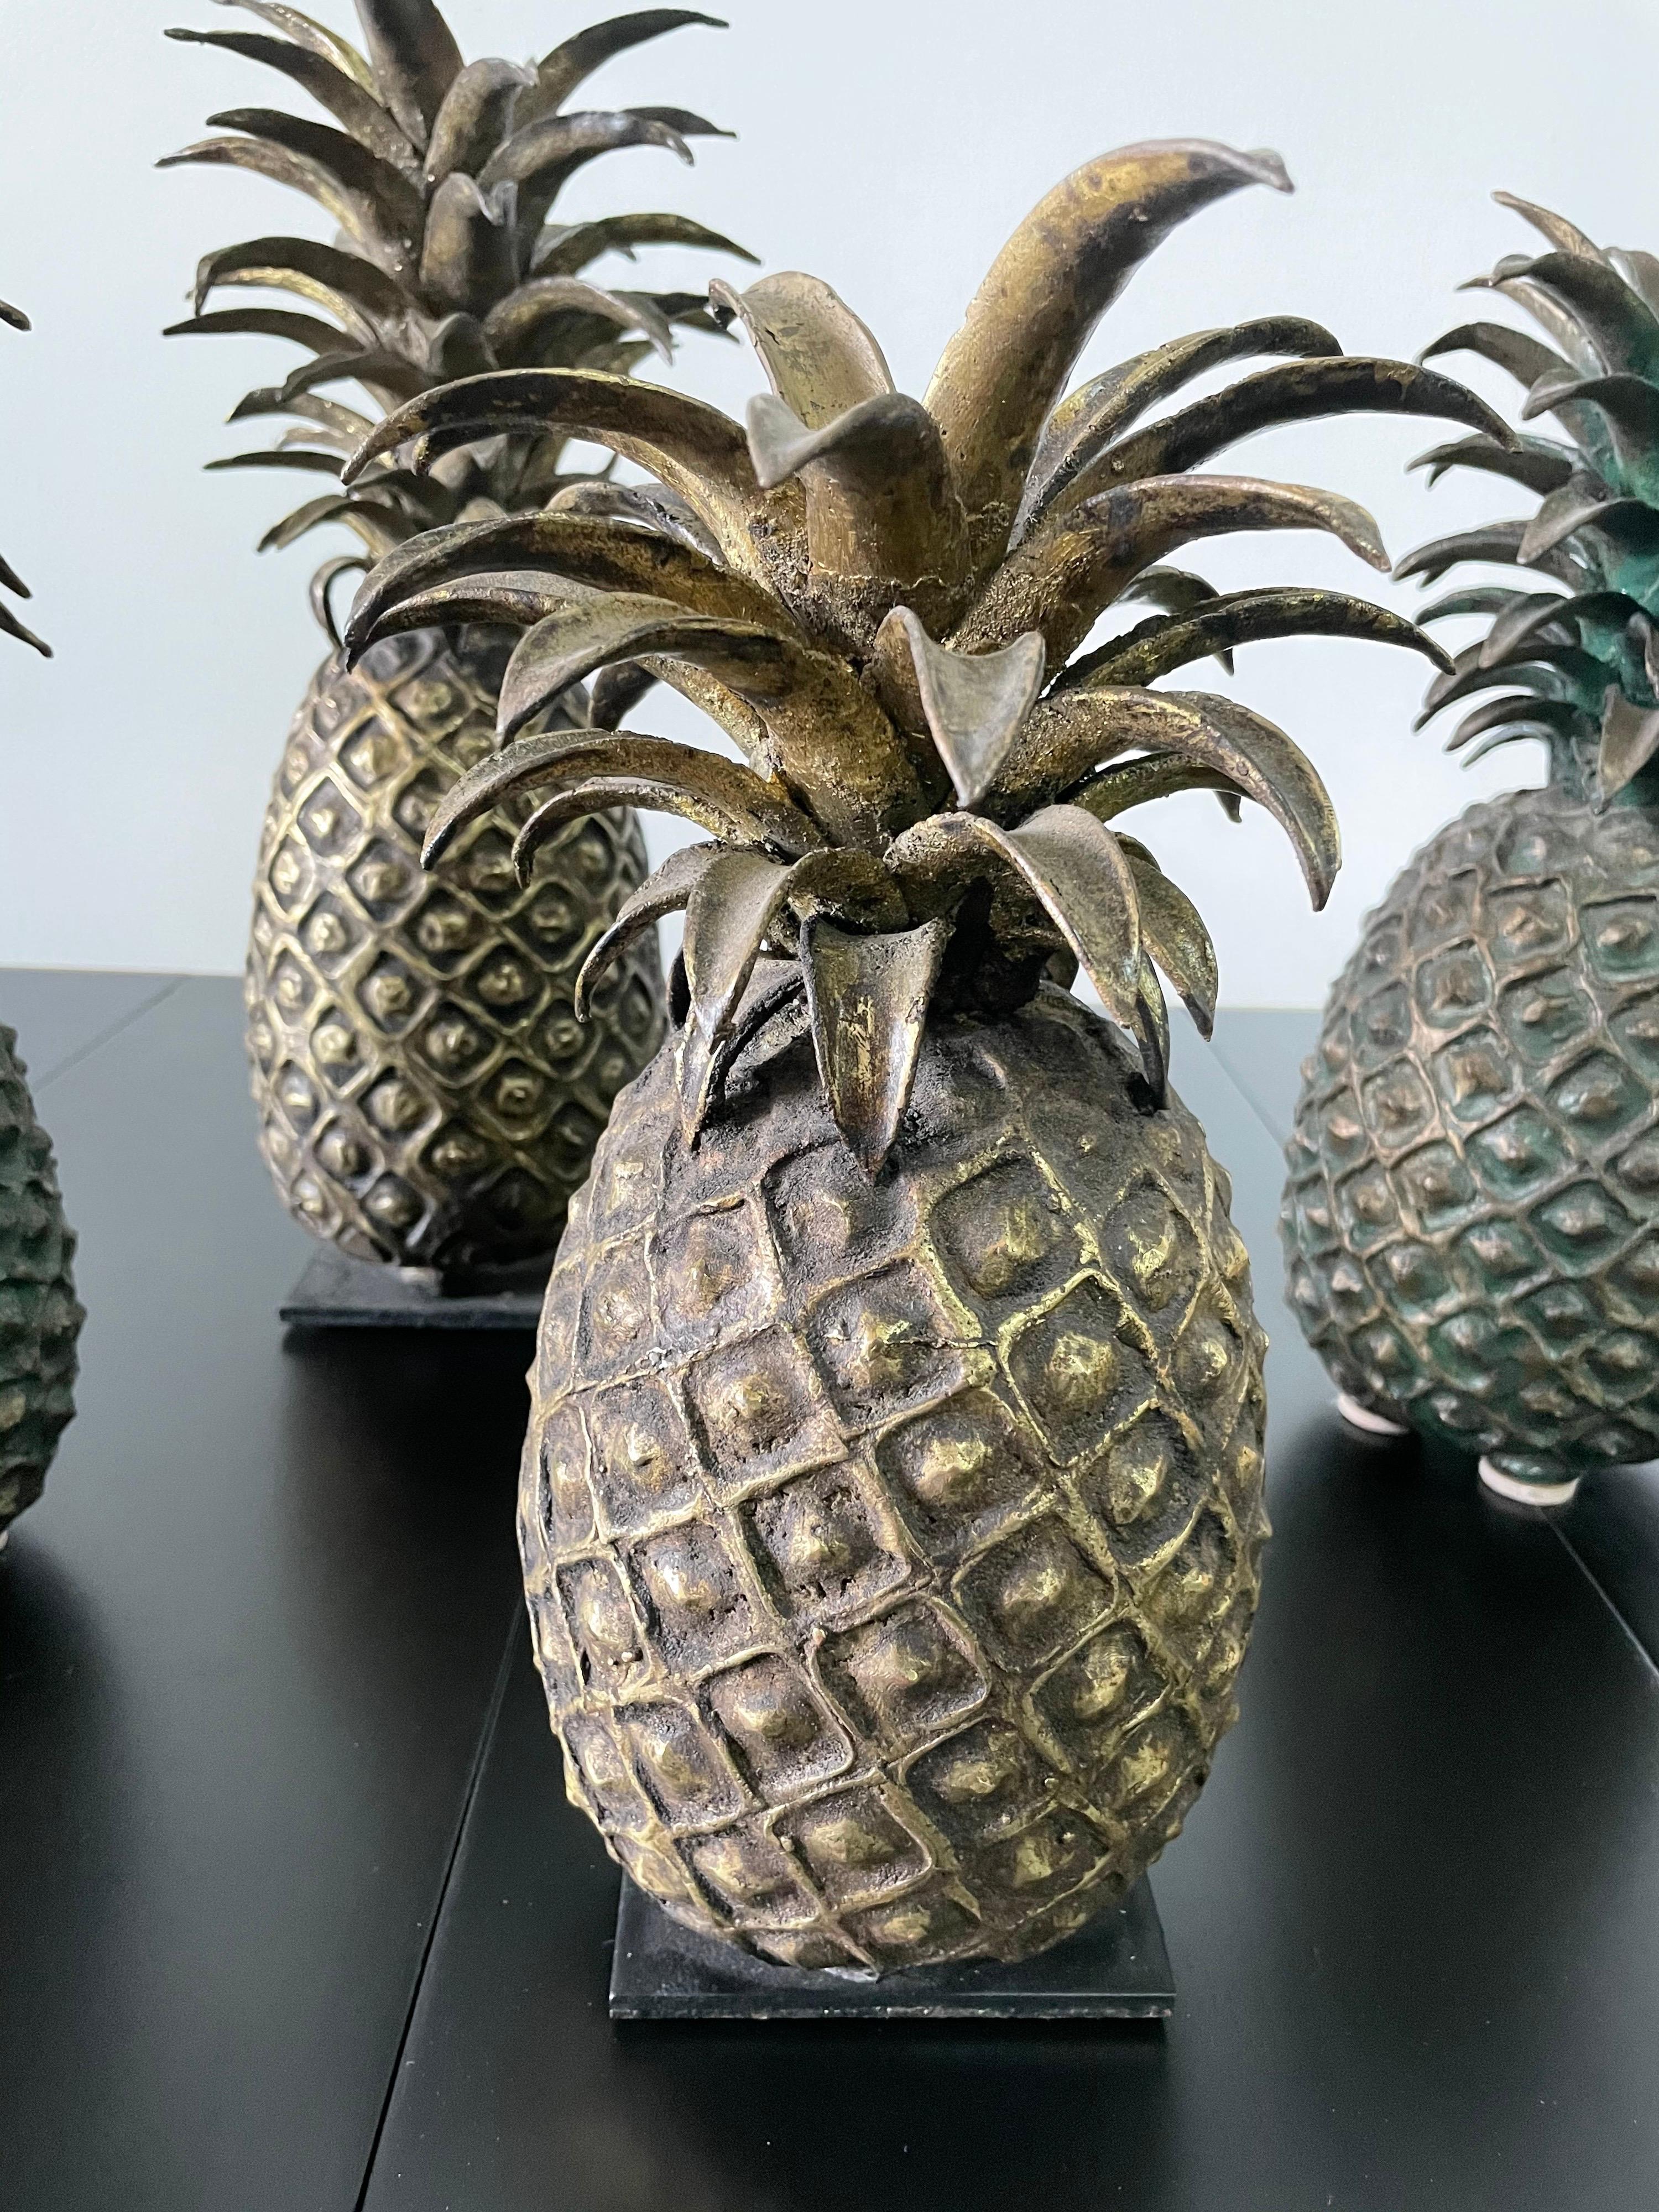 Organic Modern Grouping of 4 Vintage Lost Wax Bronze Pineapple Sculptures from Ivory Coast